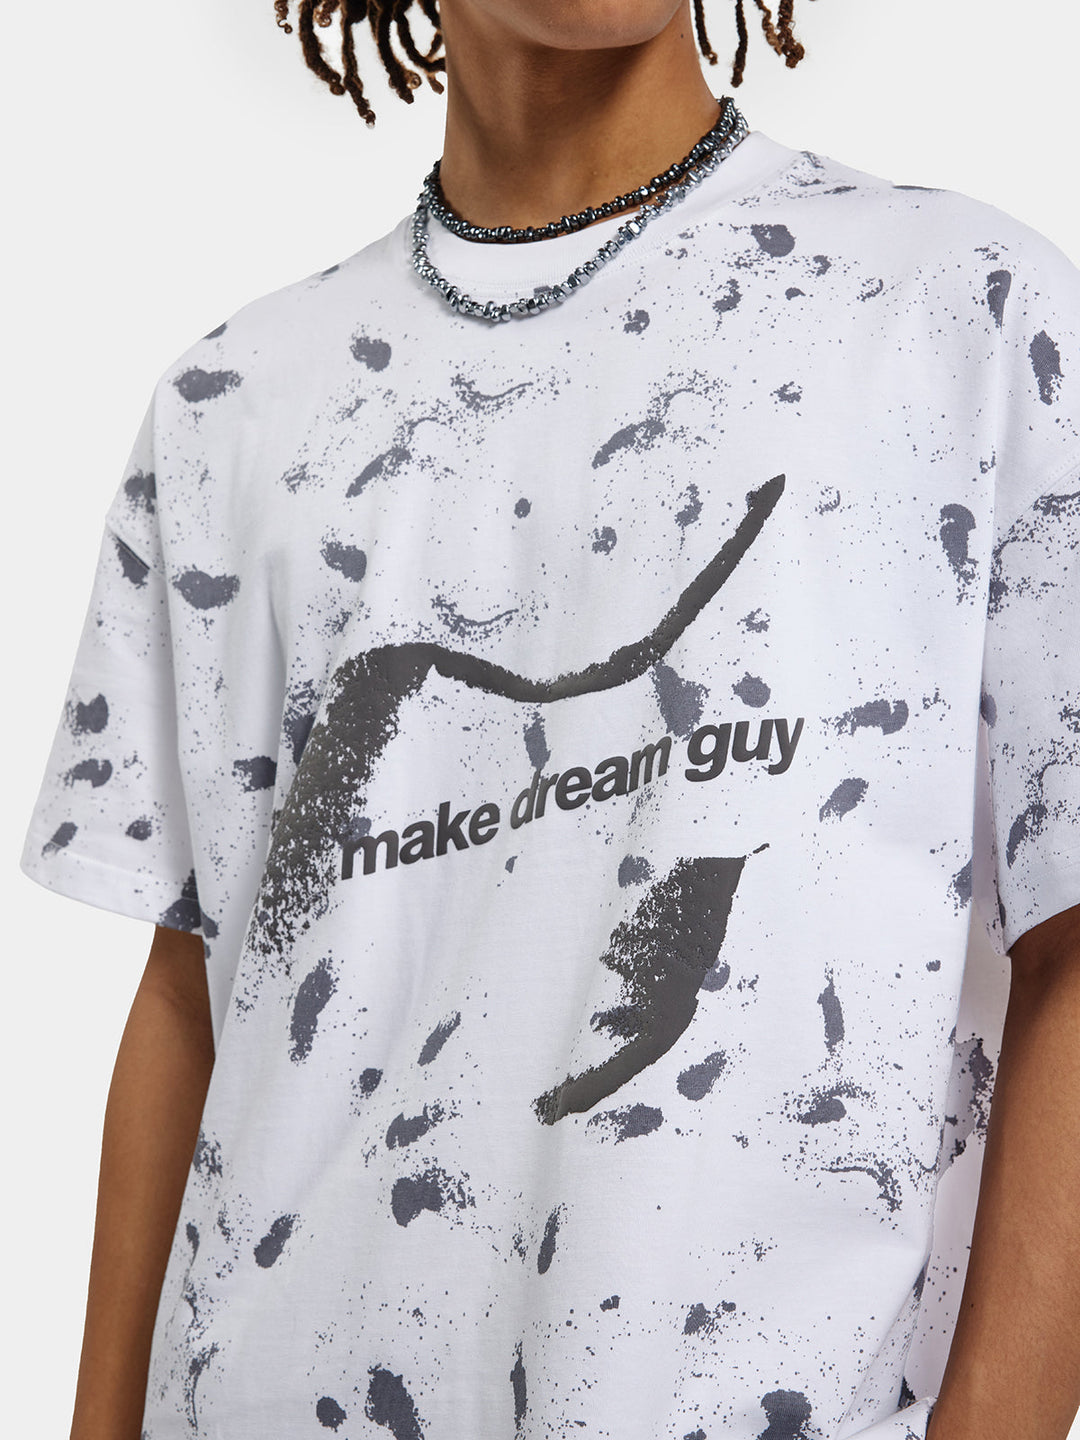 T-one Dye Printed Graphic Short Sleeve Tops-white